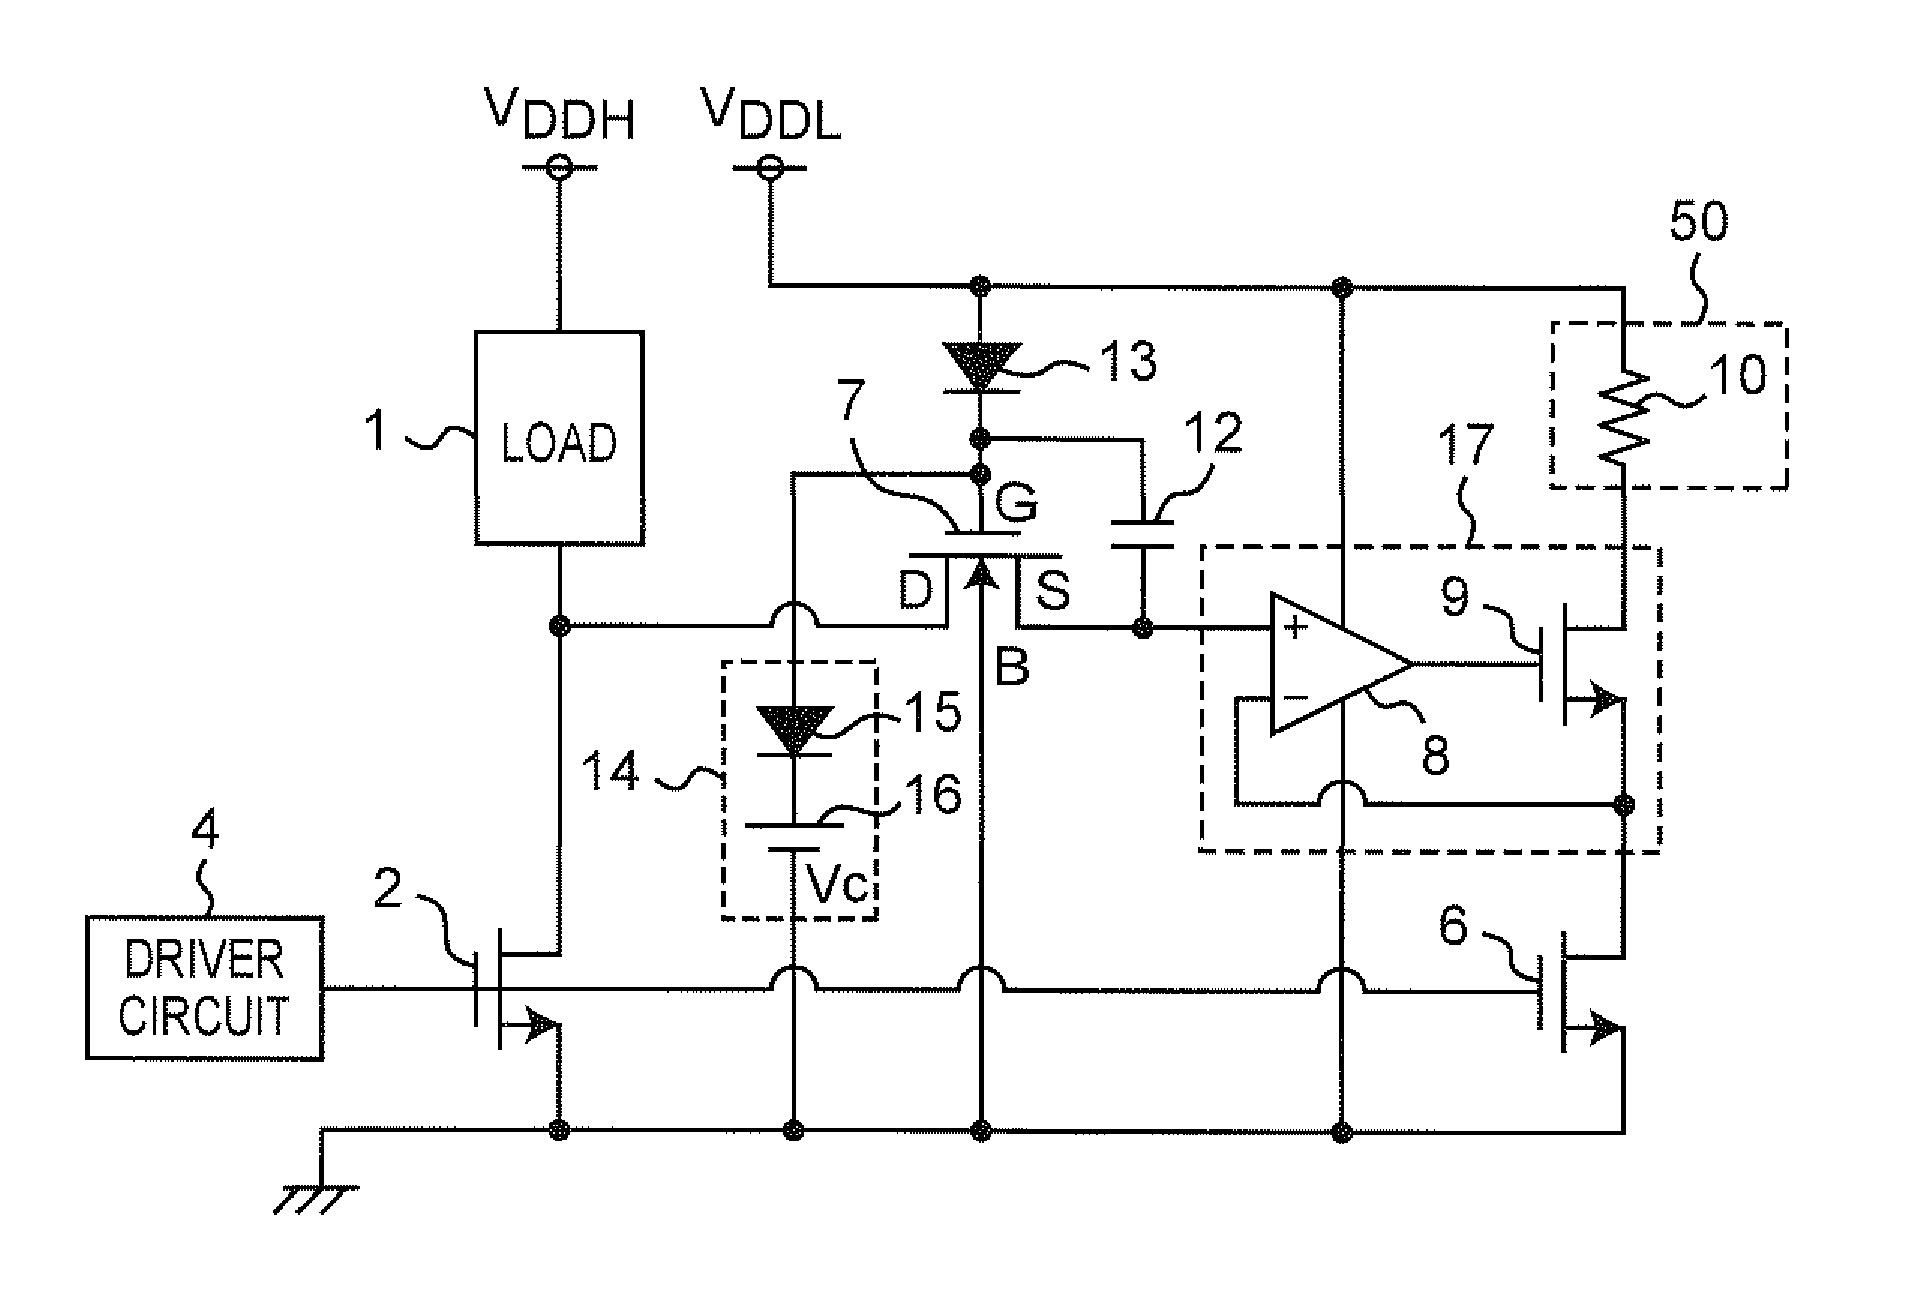 Current detection circuit including electrostatic capacitor and rectifying element for increasing gate voltage of protecting mosfet